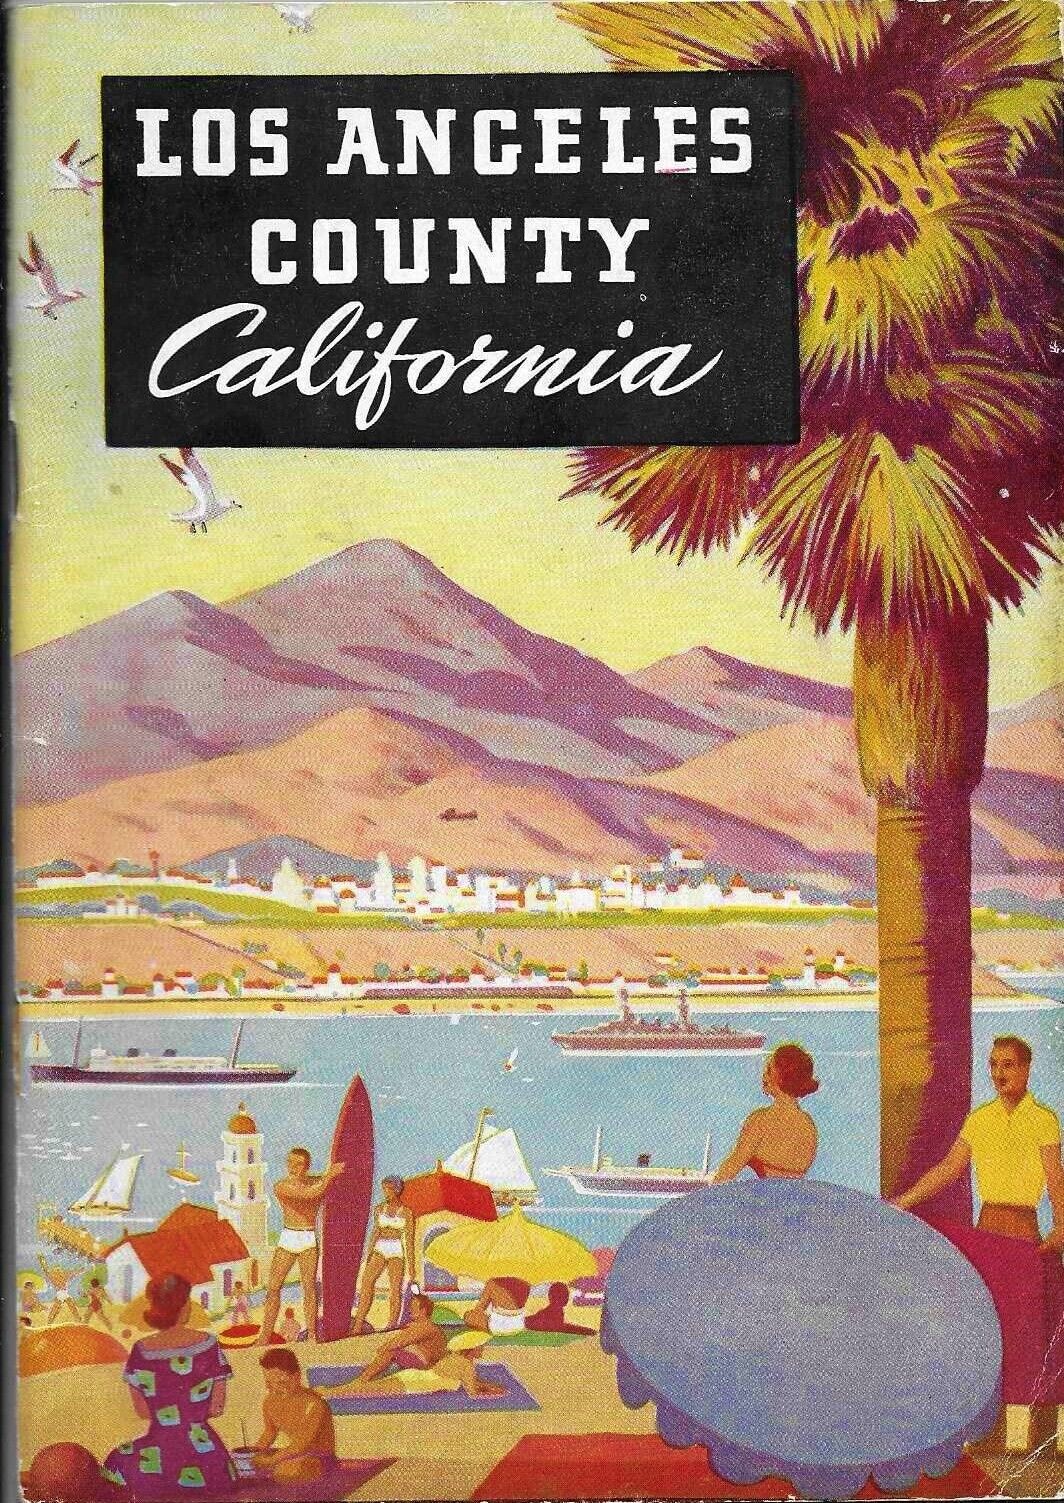 1935 LOS ANGELES COUNTY CALIFORNIA 64 PAGE INFO BOOKLET - RARE INDIGENT WARNING